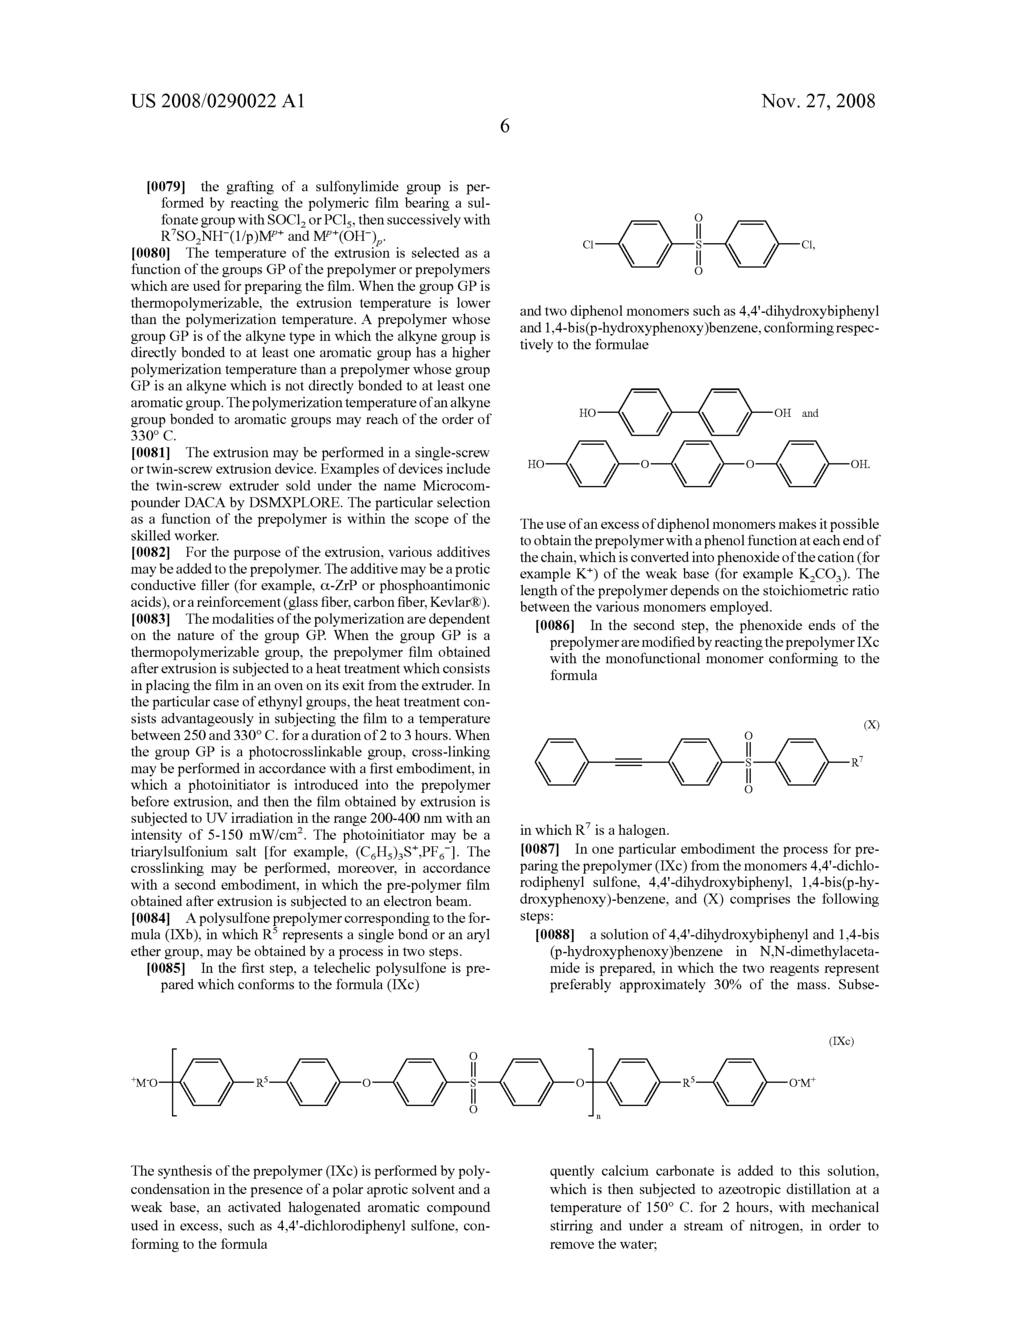 Crosslinked Polymer Film Bearing Ionic Groupings - diagram, schematic, and image 22